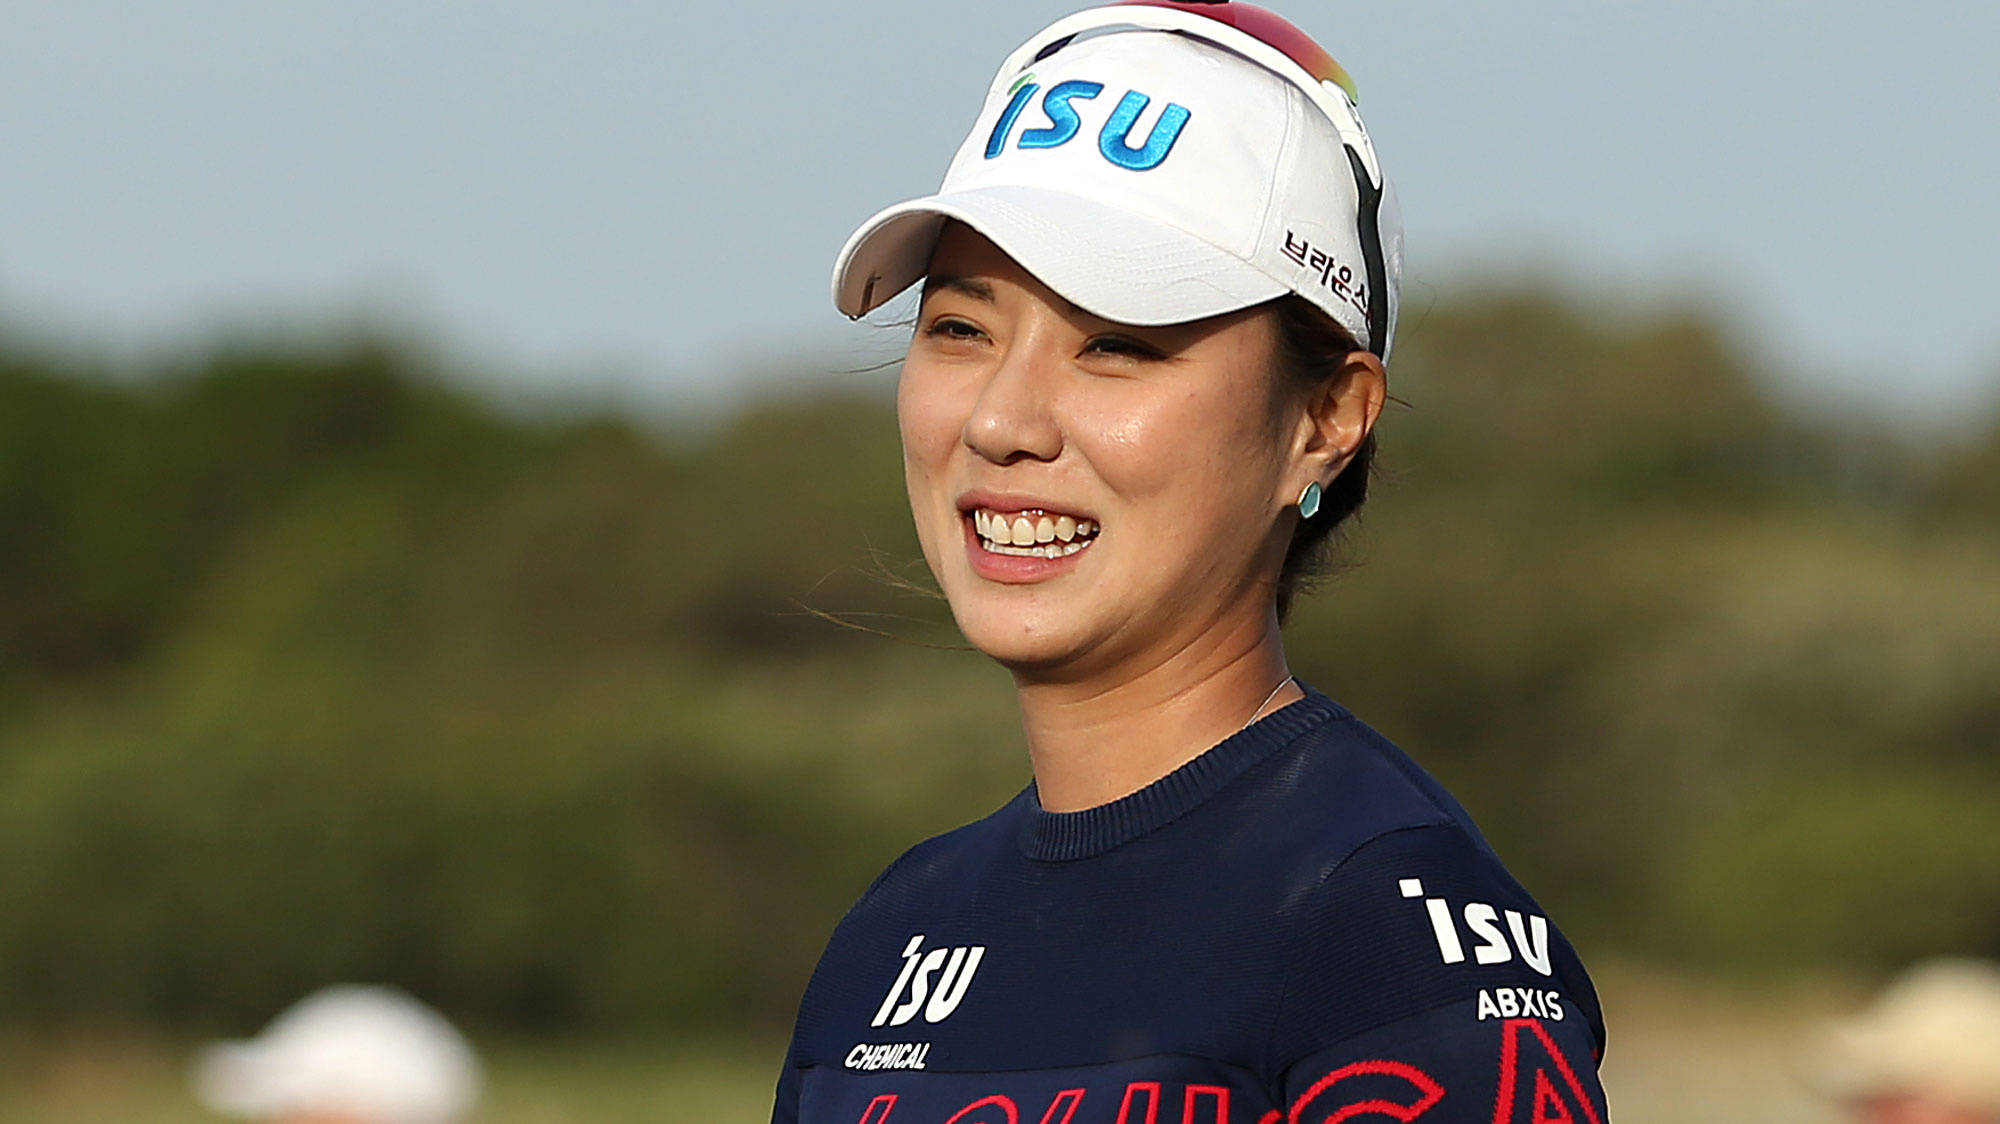 Hee-young Park celebrates winning the ISPS Handa Vic Open